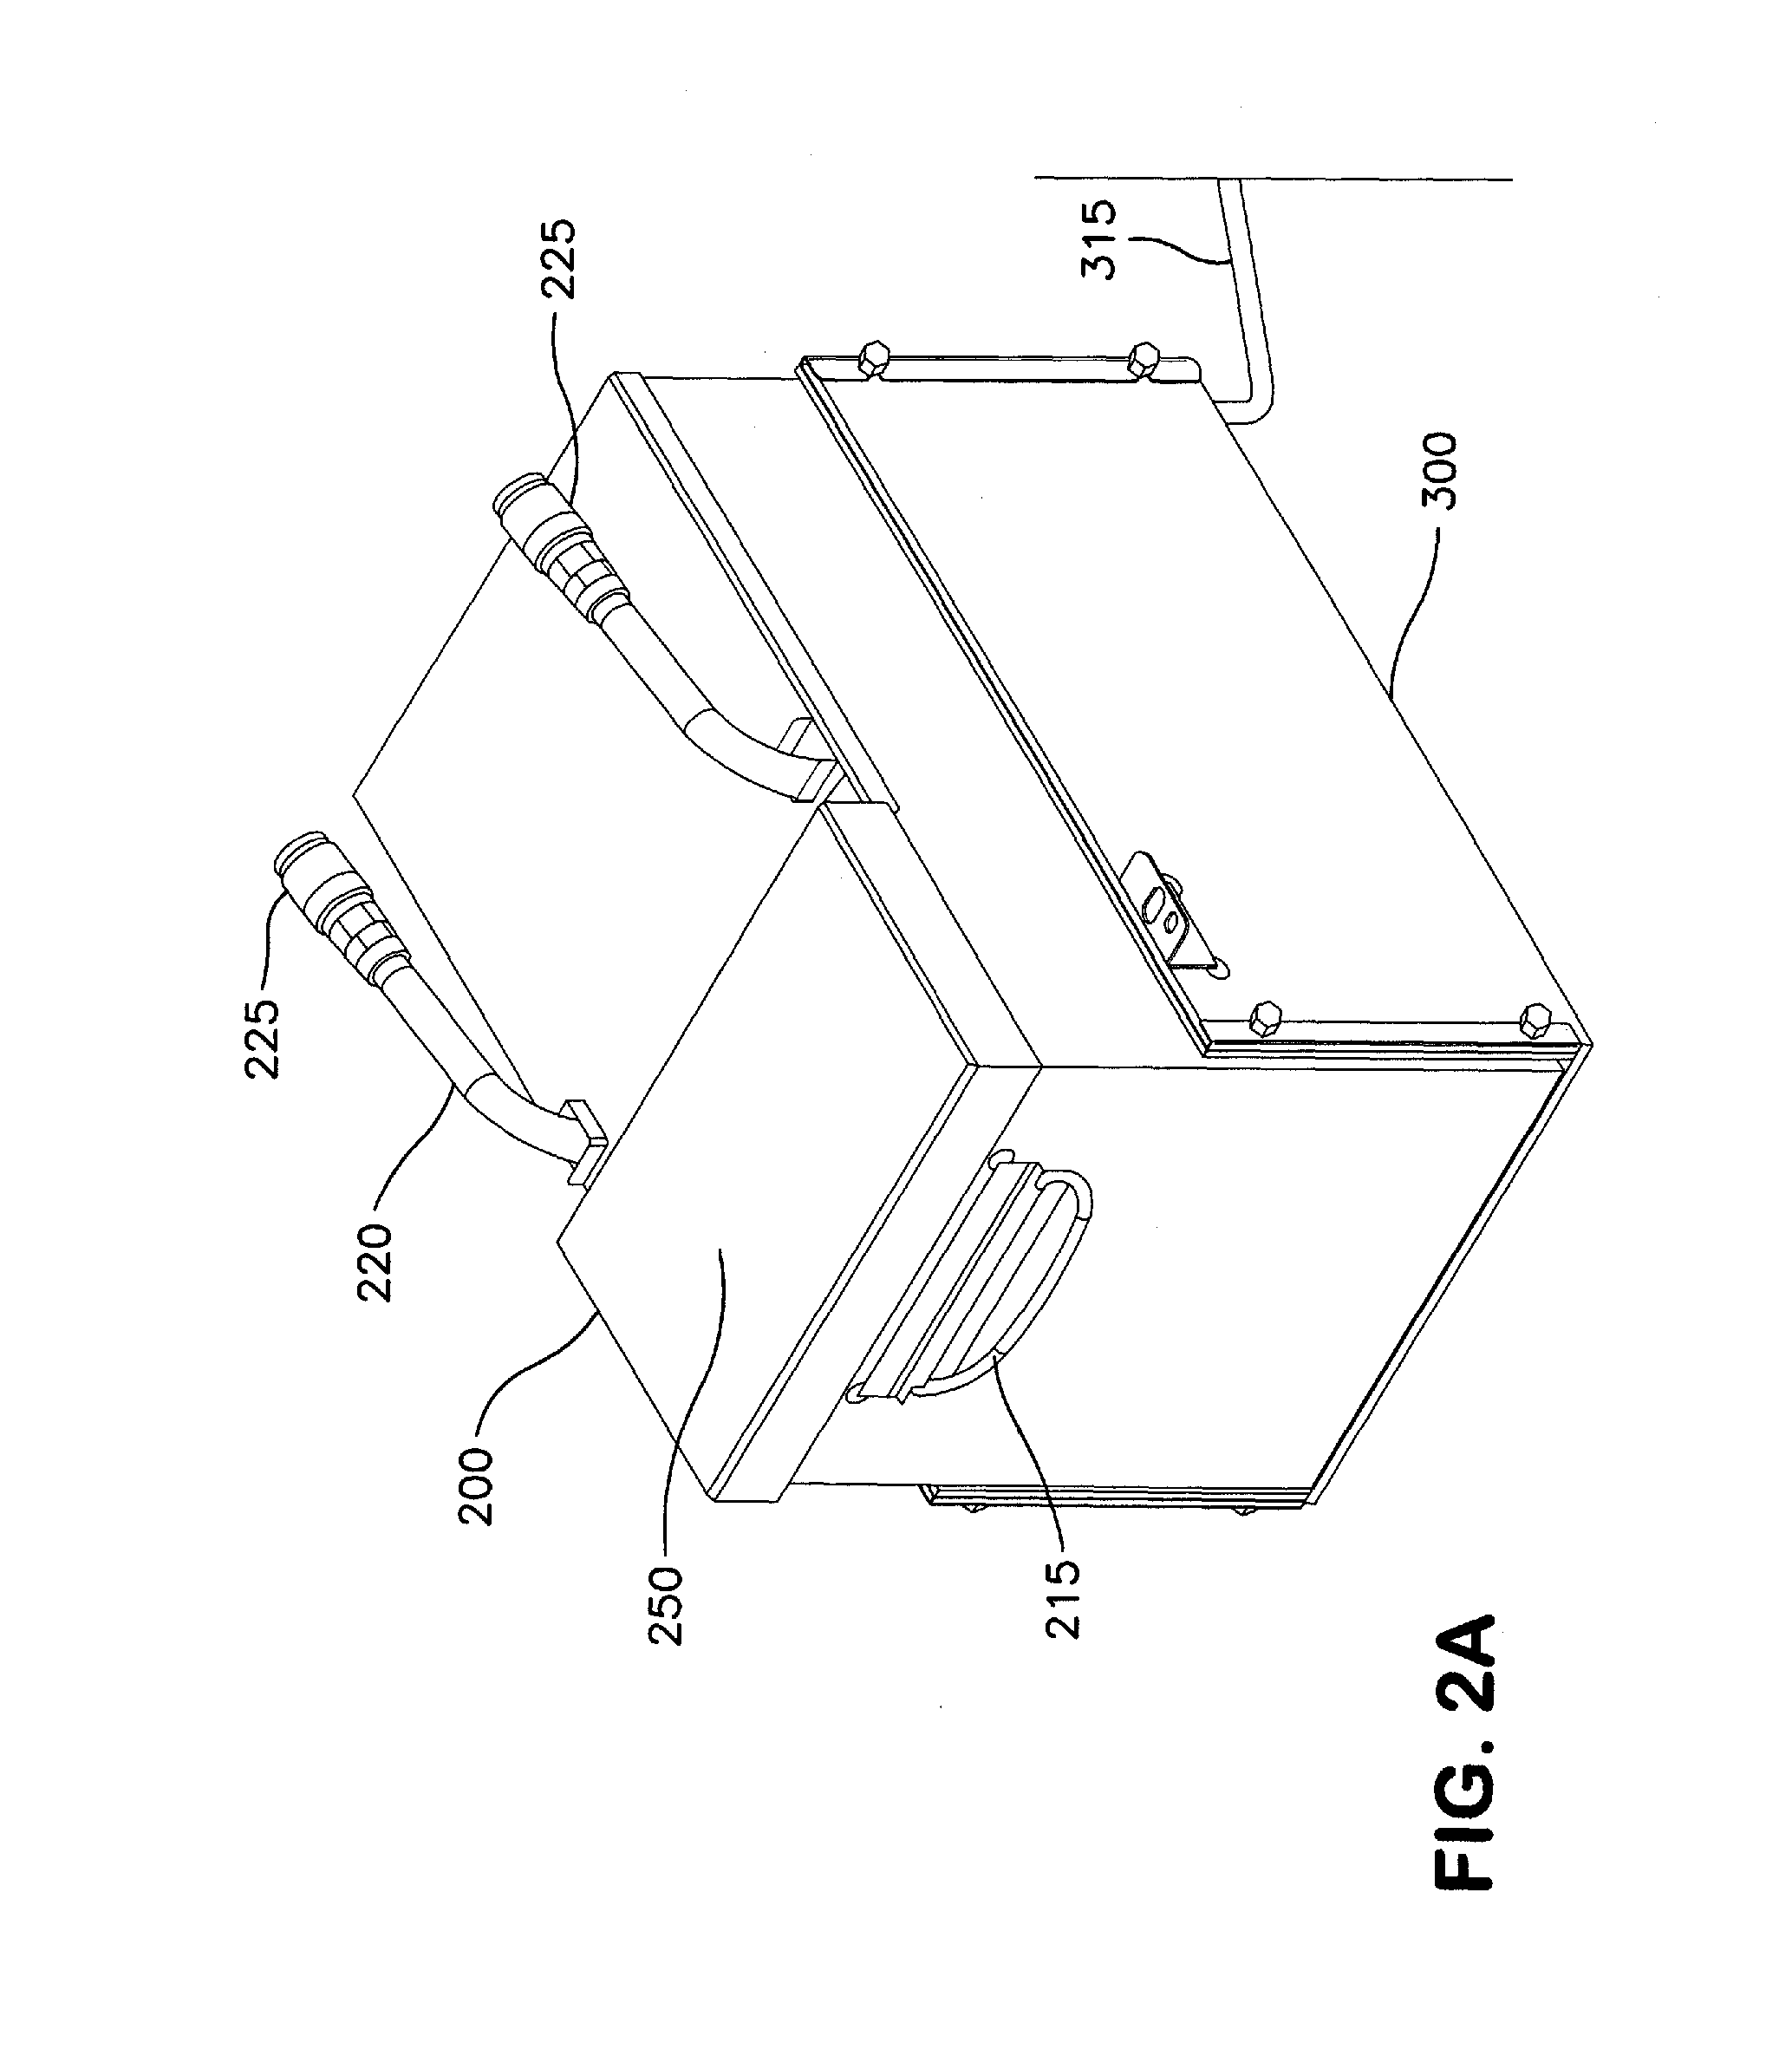 Systems and methods for melting and maintaining temperature of semi-solid cooking media